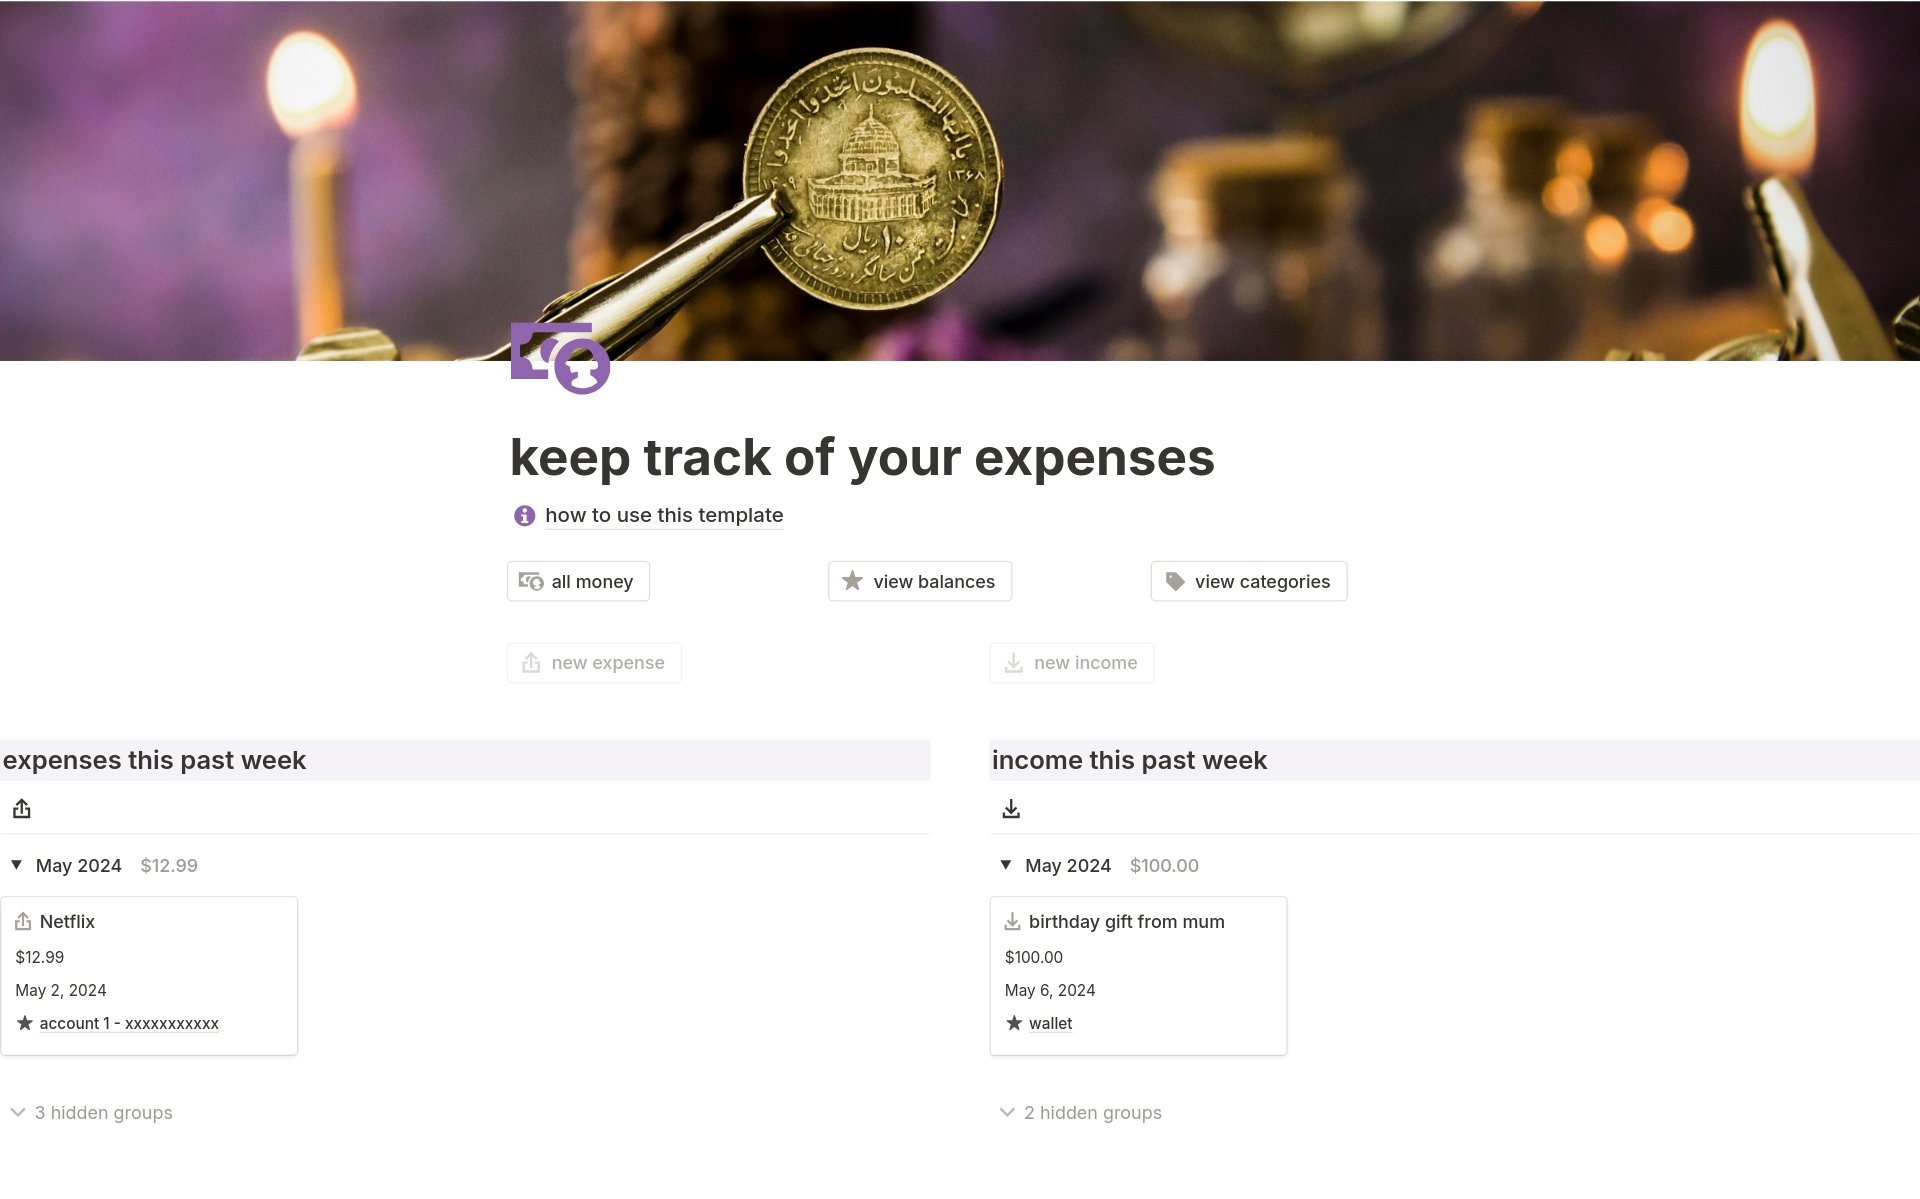 keep track of your expensesのテンプレートのプレビュー